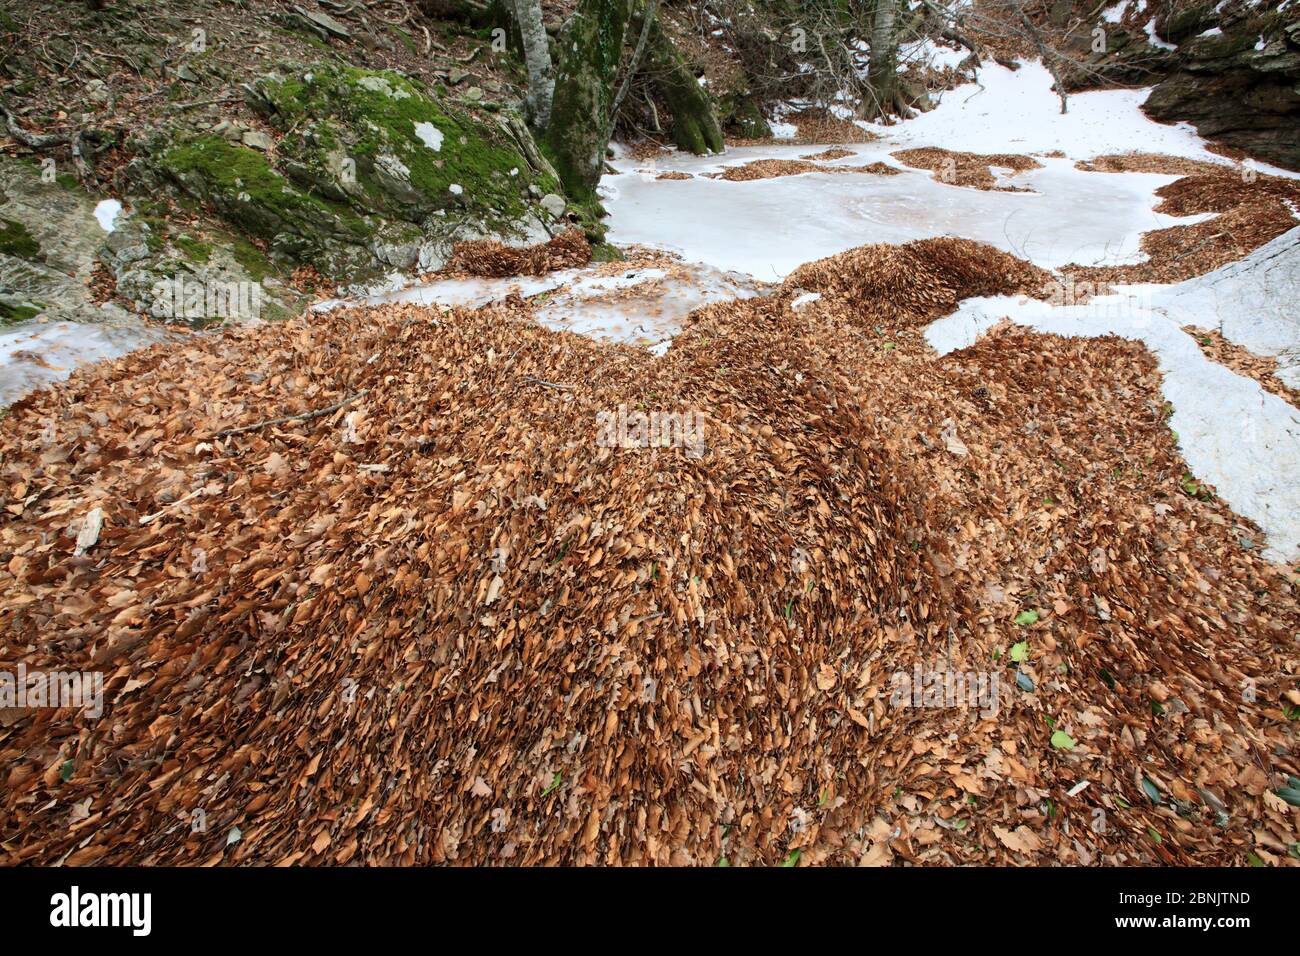 European beech (Fagus sylvatica) leaves in the Massane River, Alberes Mountains, Pyrenees, France, February. Stock Photo